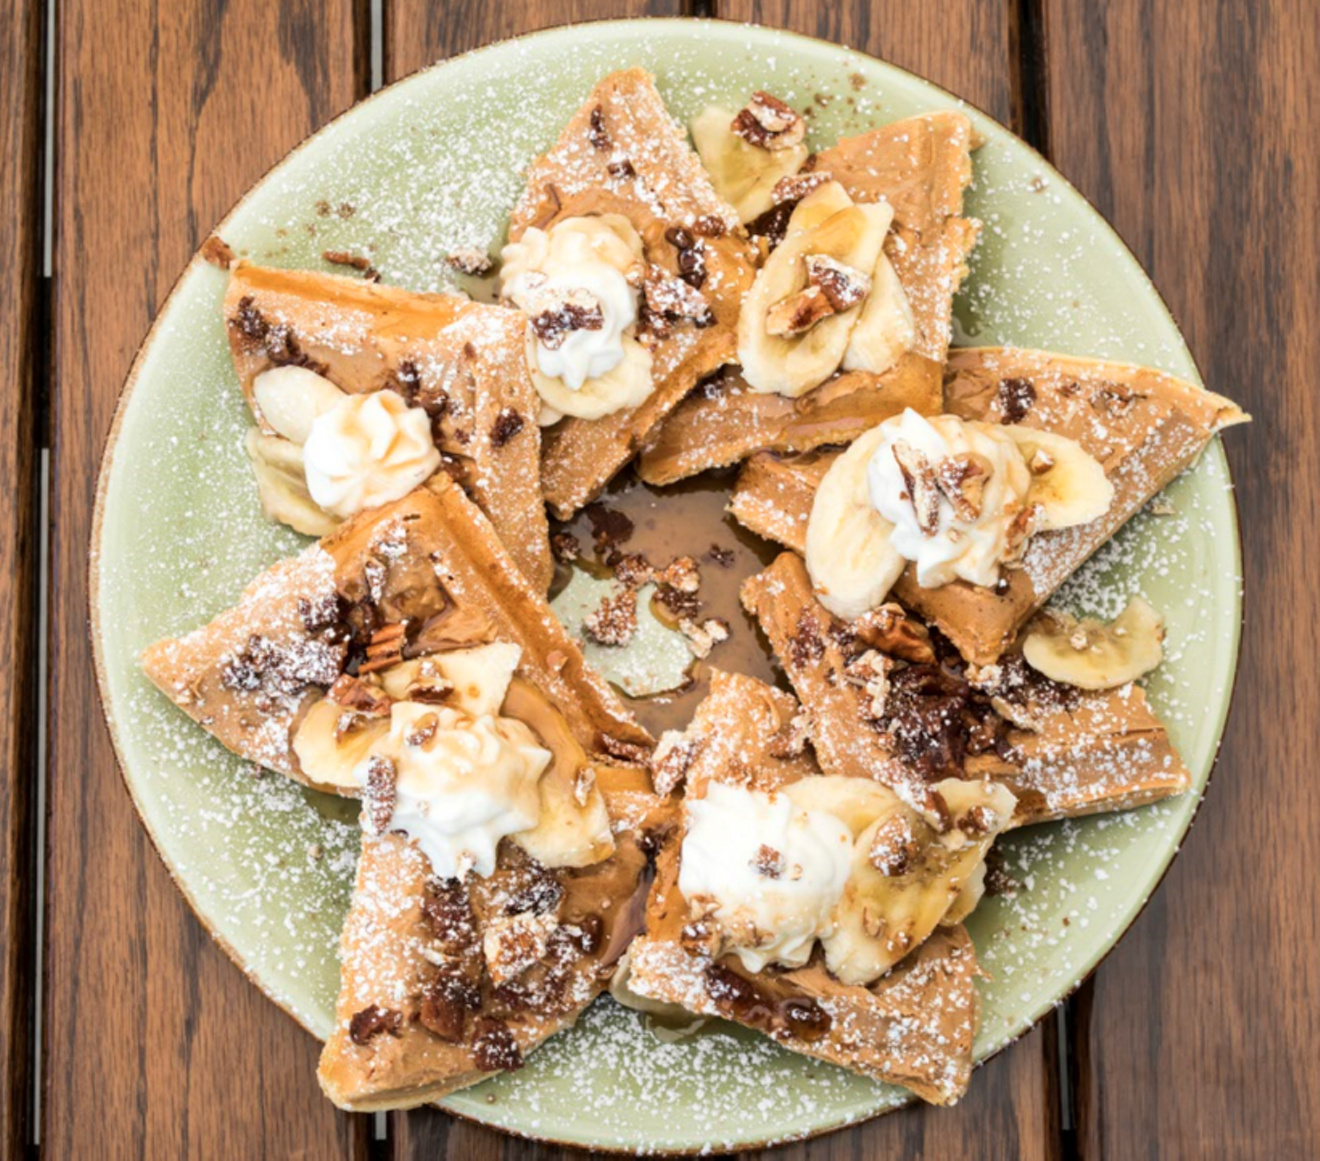 Celebrate National Waffle Day with TUK's ode to Elvis.